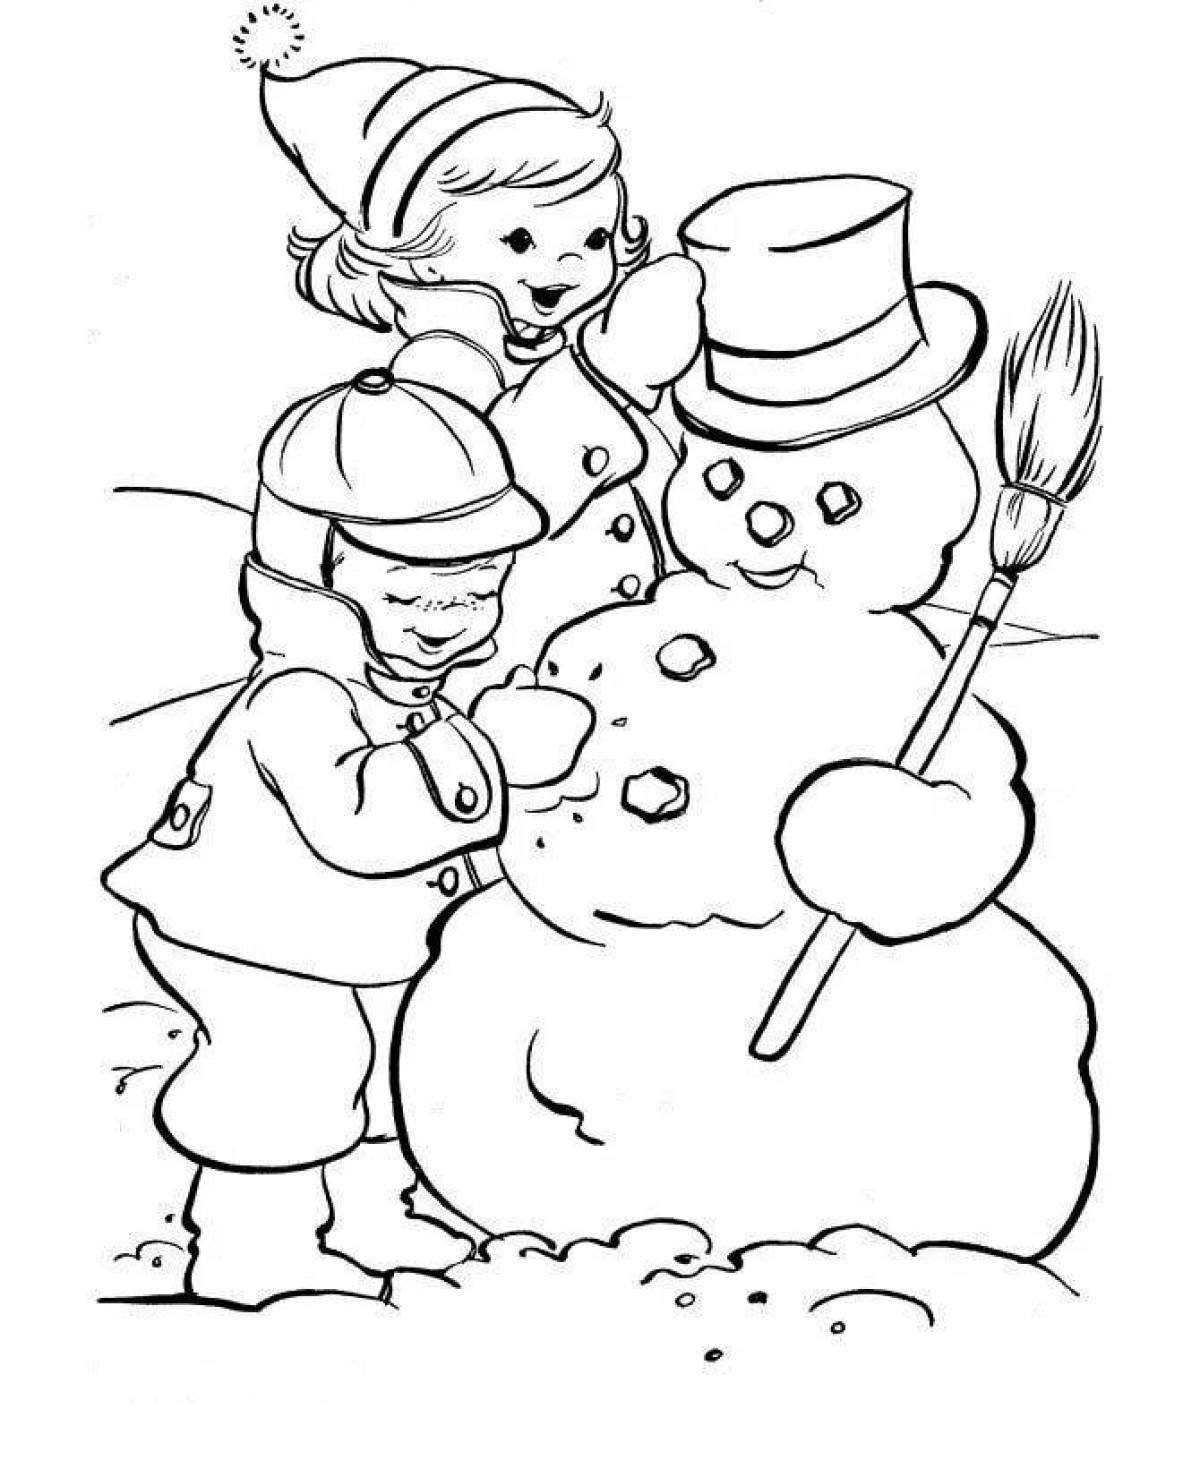 Outstanding snowman coloring